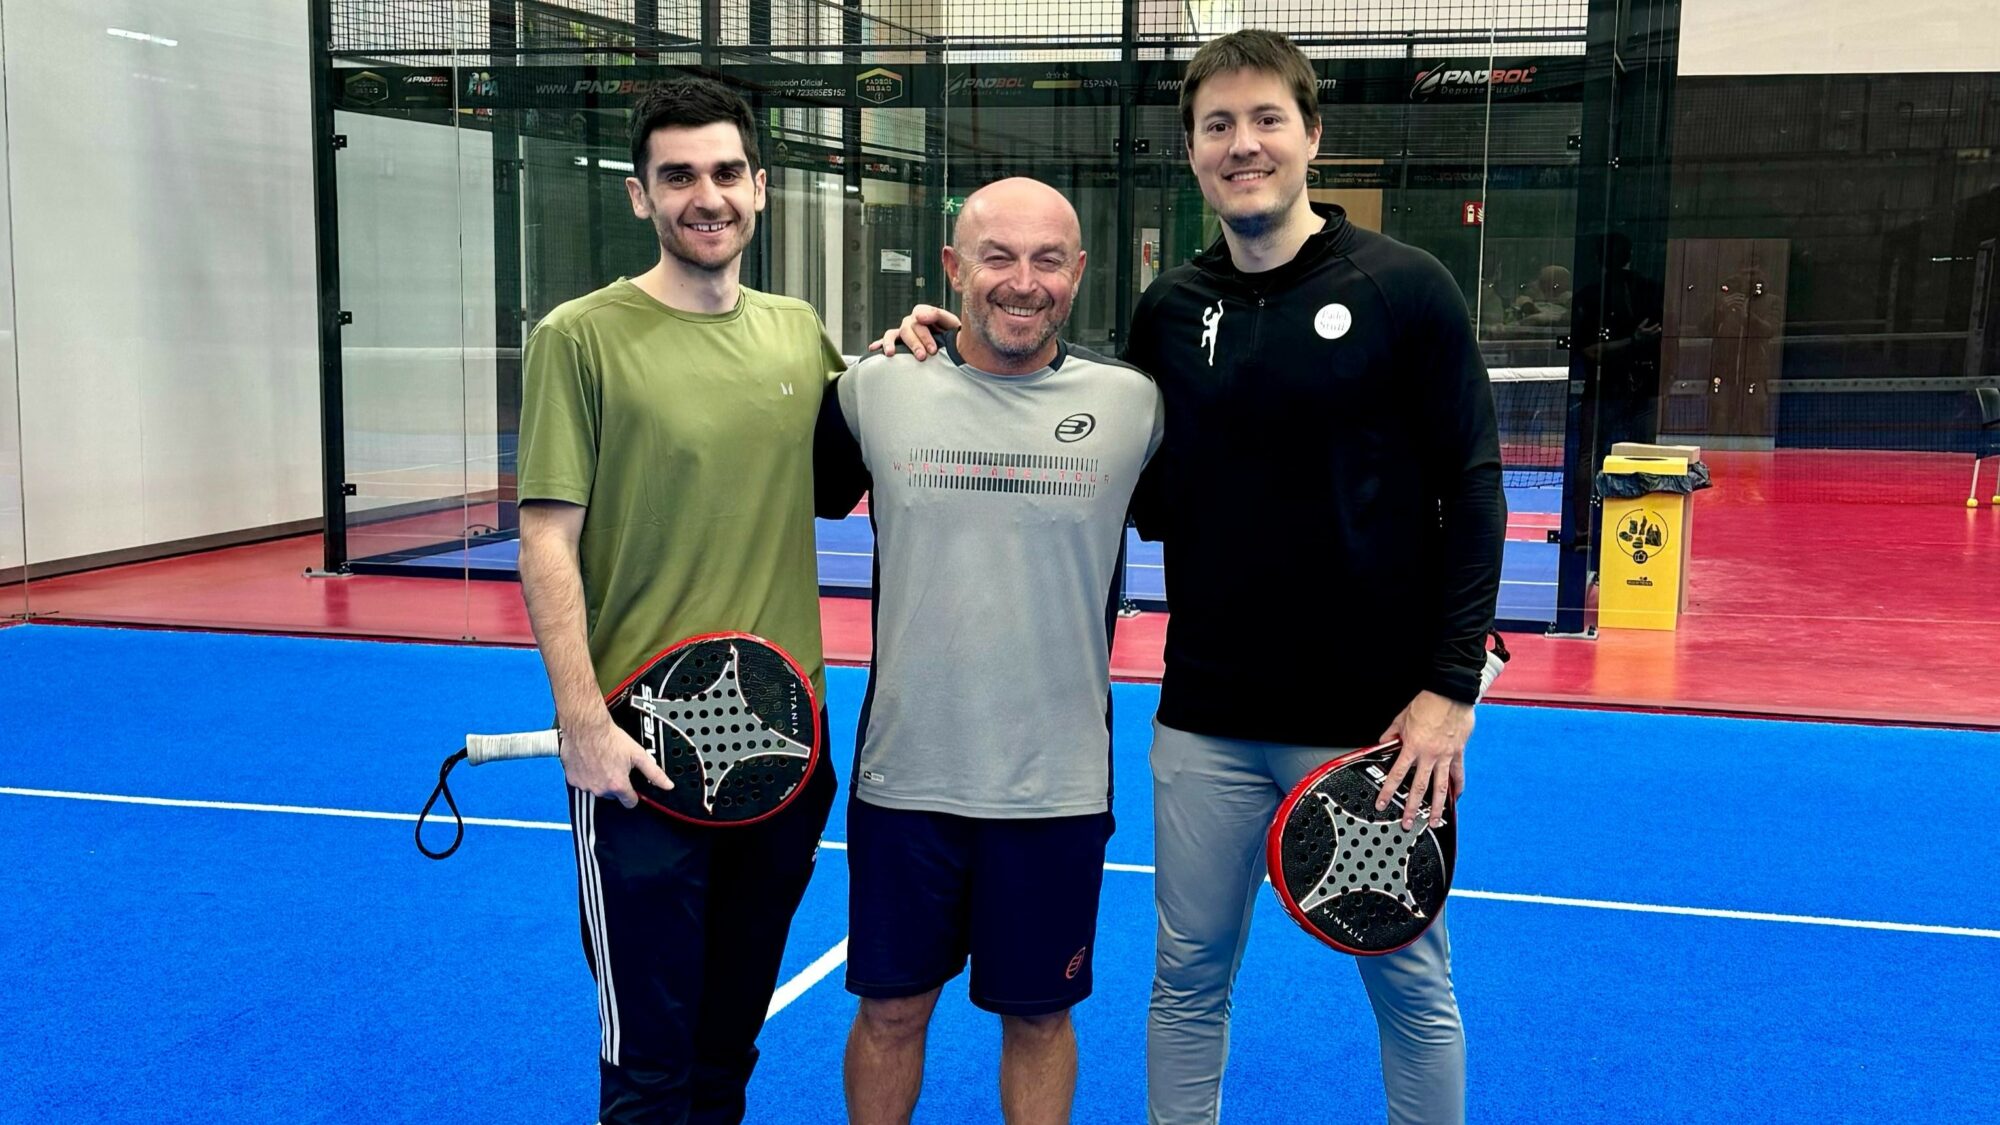 Alexandre Bellugue: “Complete your training padel in Spain is a big plus”